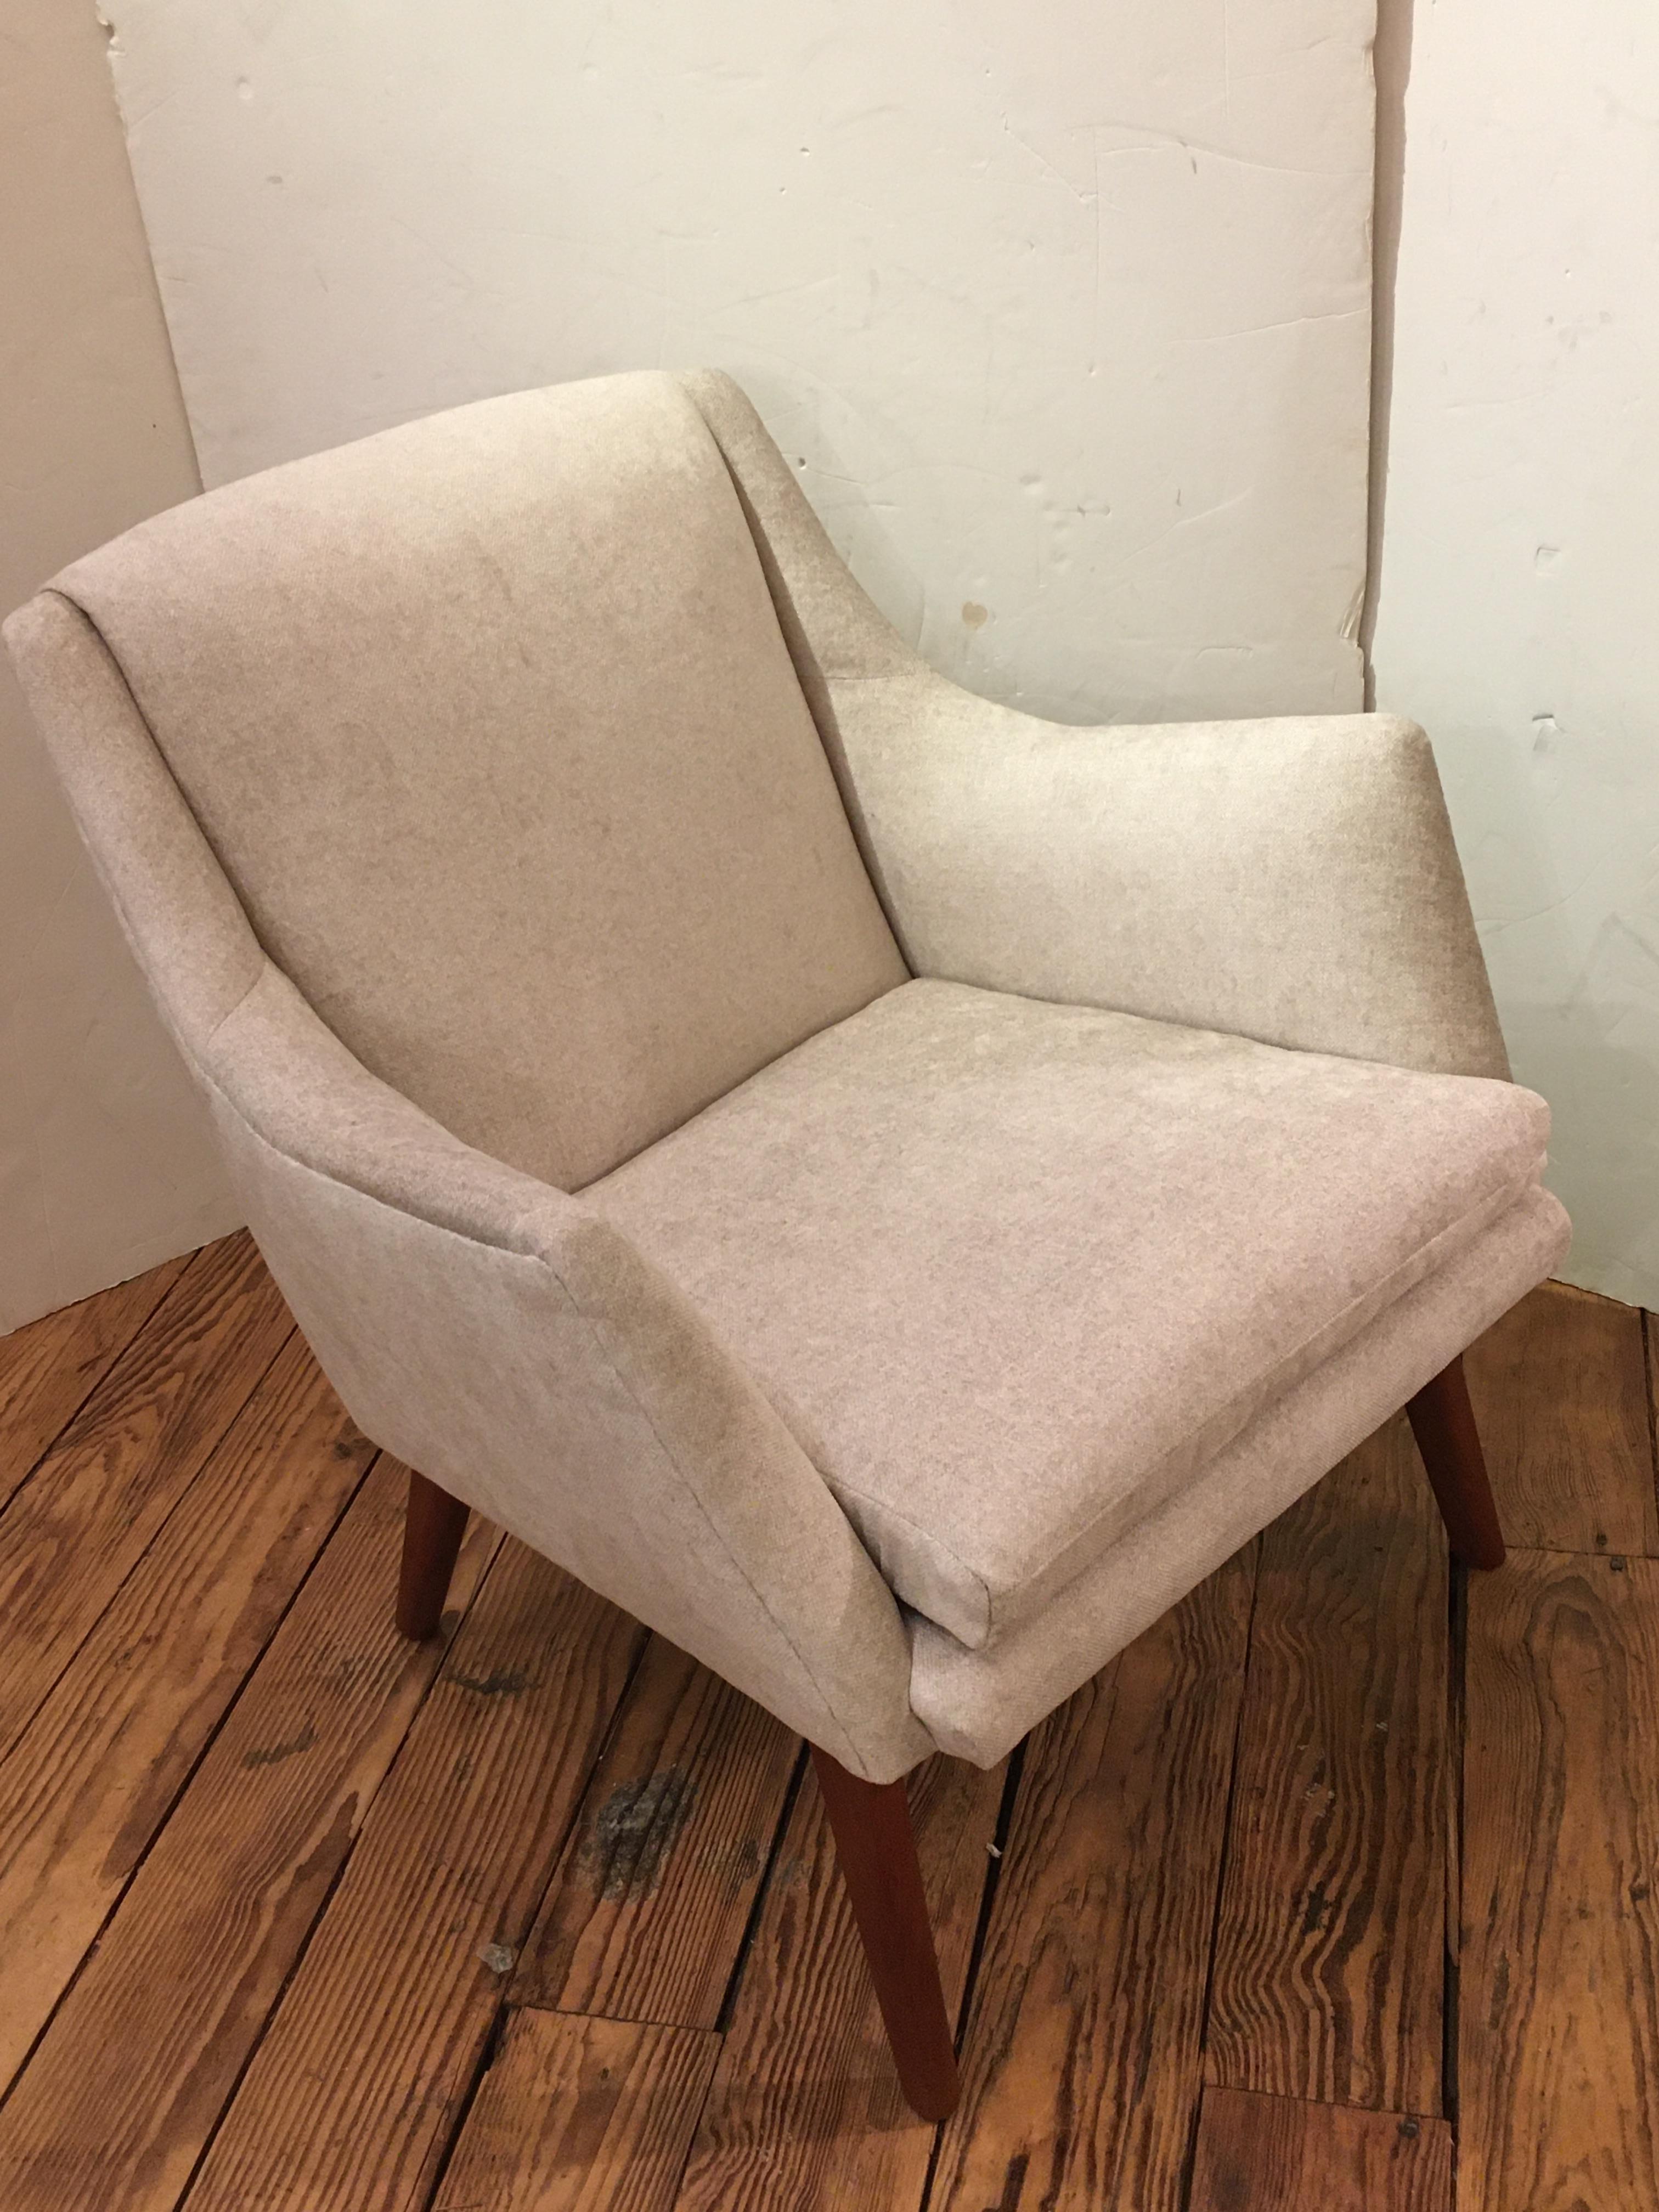 A stylish Danish modern 1950s club chair having streamline silhouette and teak legs. Brand new style appropriate cream upholstery is neutral and chic.